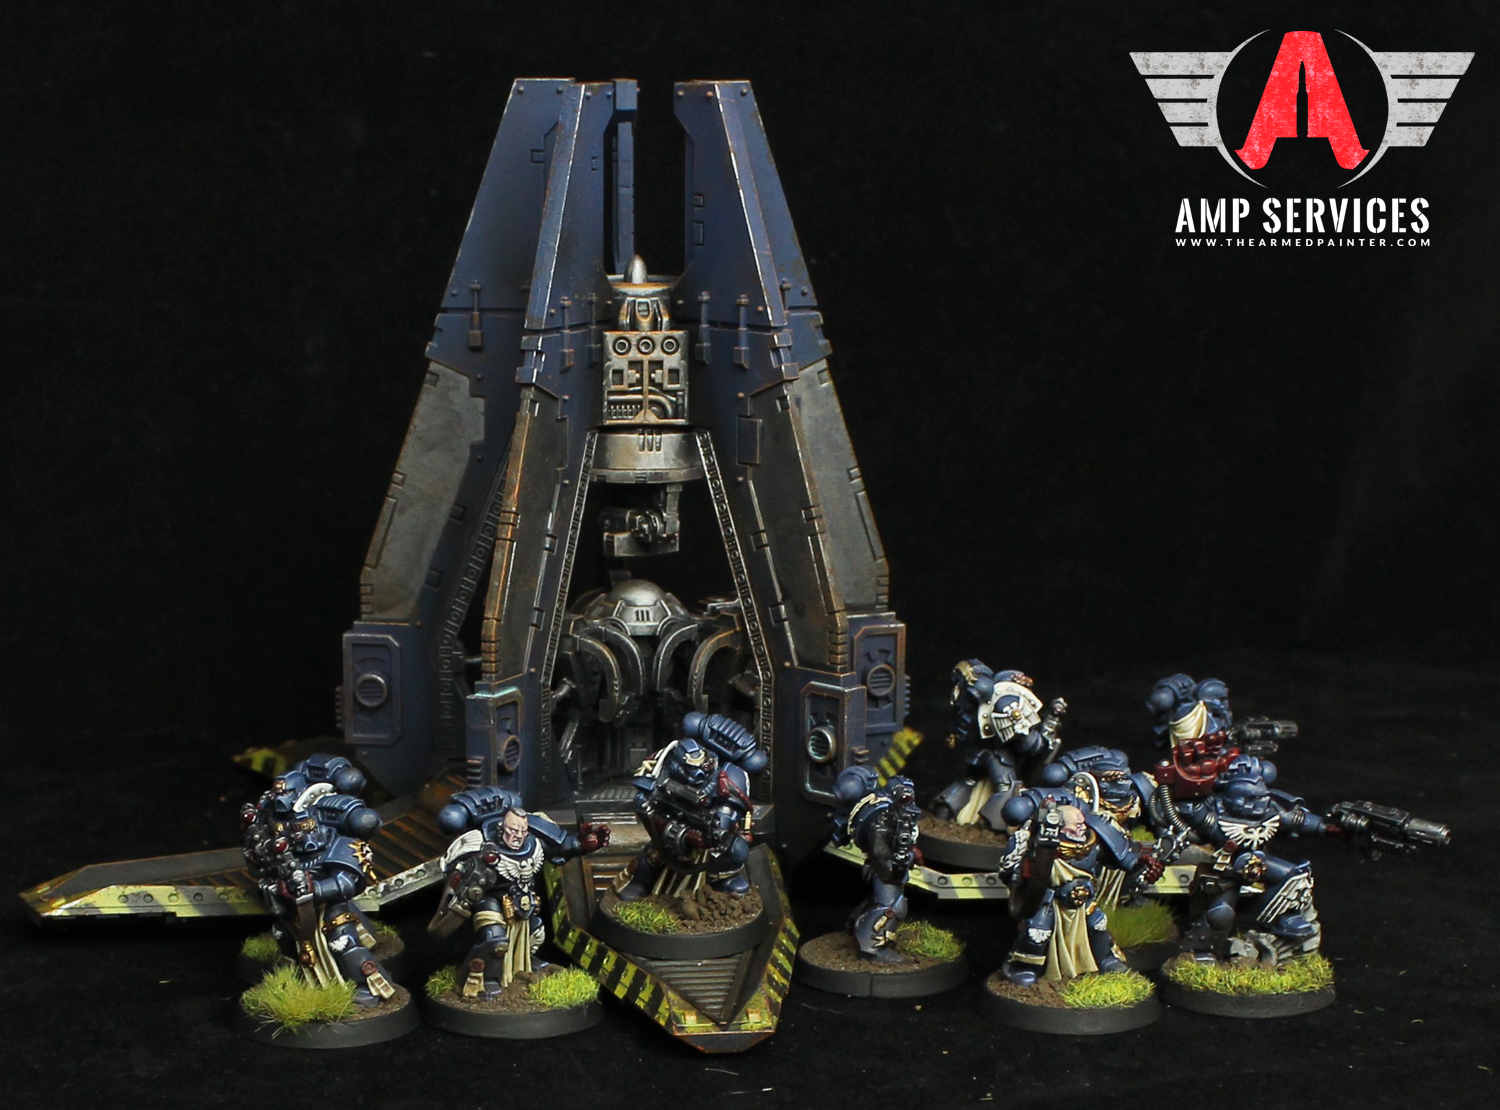 Brush 4 Hire, Crimson Fists, Space Marines, The Armed Painter, Warhammer 40,000